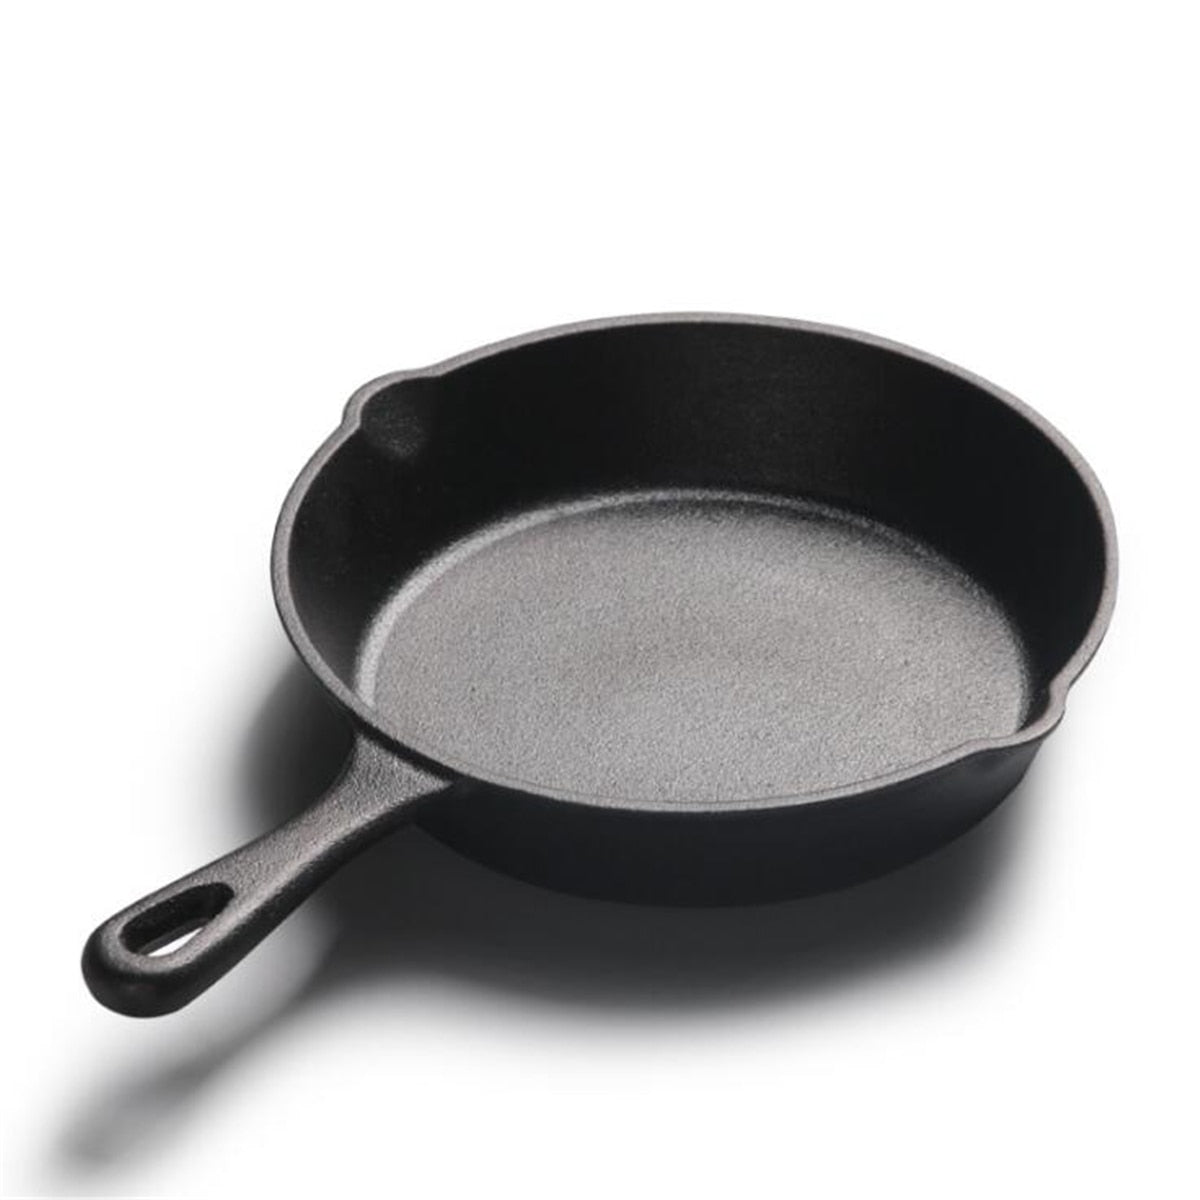  40cm black cast iron pig iron pan extra large non stick frying  pan frying pan gas induction cooker (size: 15.7 inches long x 1.6 inches  high): Home & Kitchen